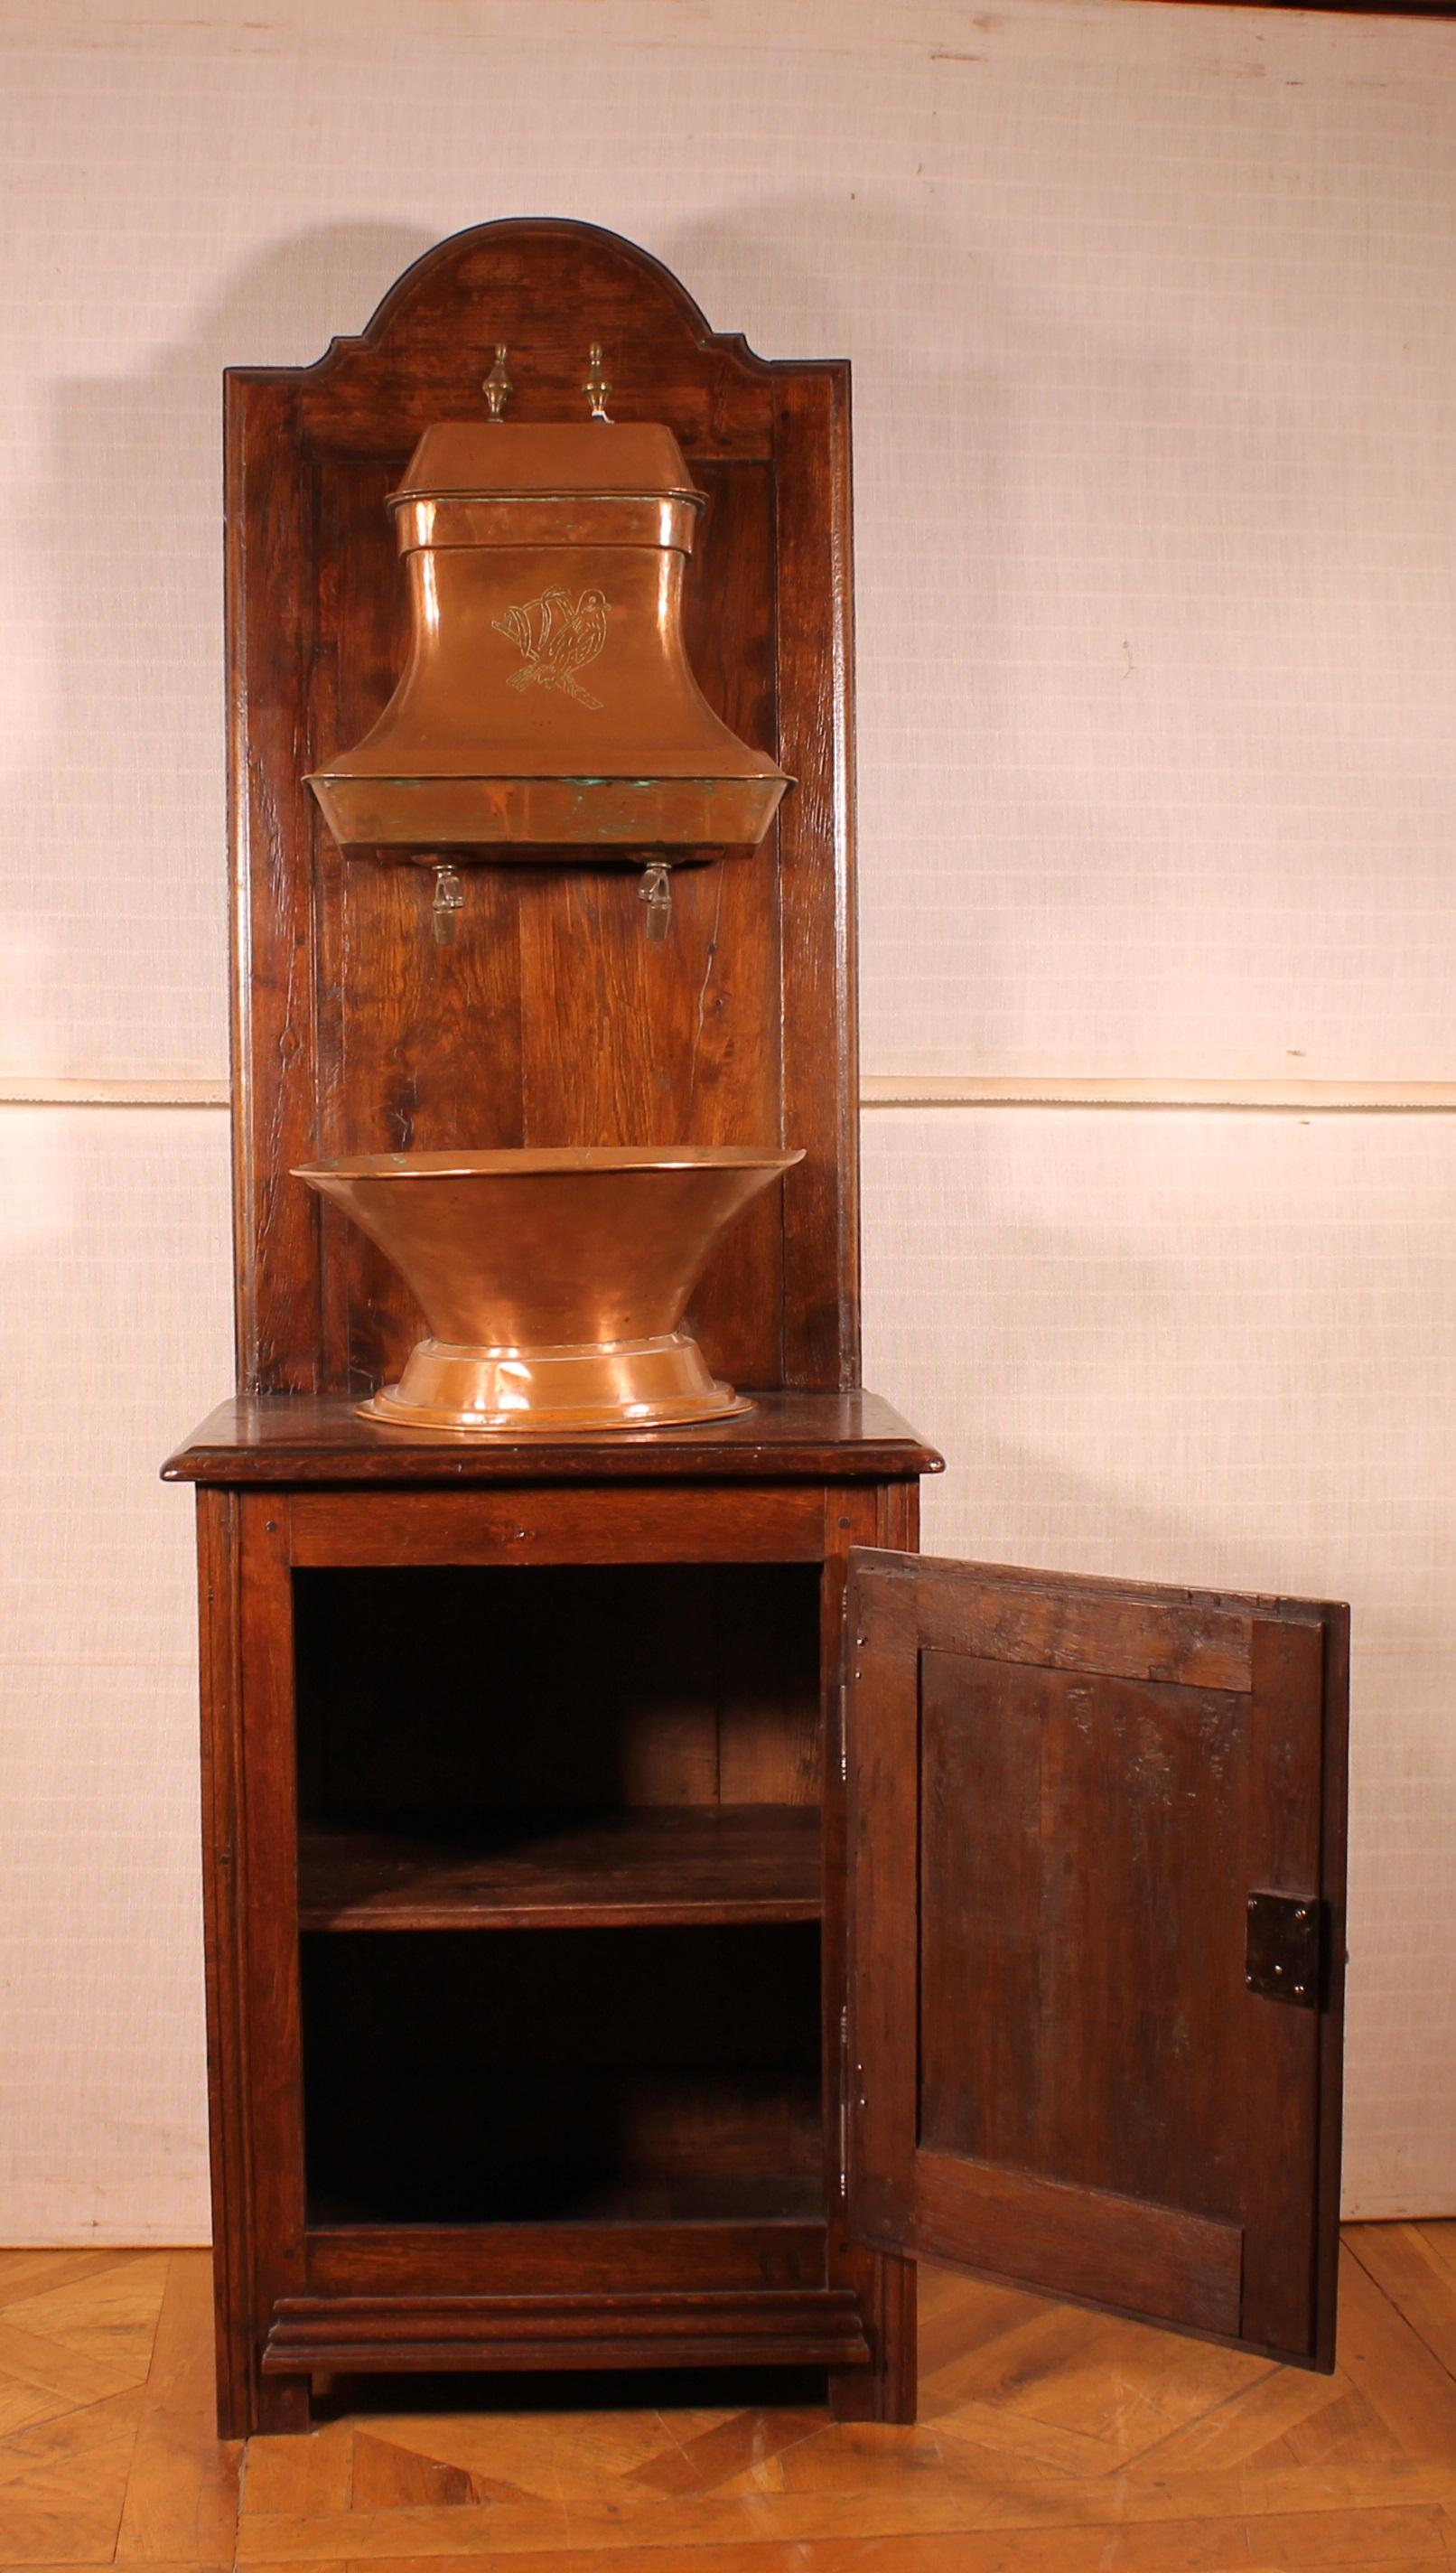 Aesthetic Movement Washstand with Copper Reservoir, 19th Century, France For Sale